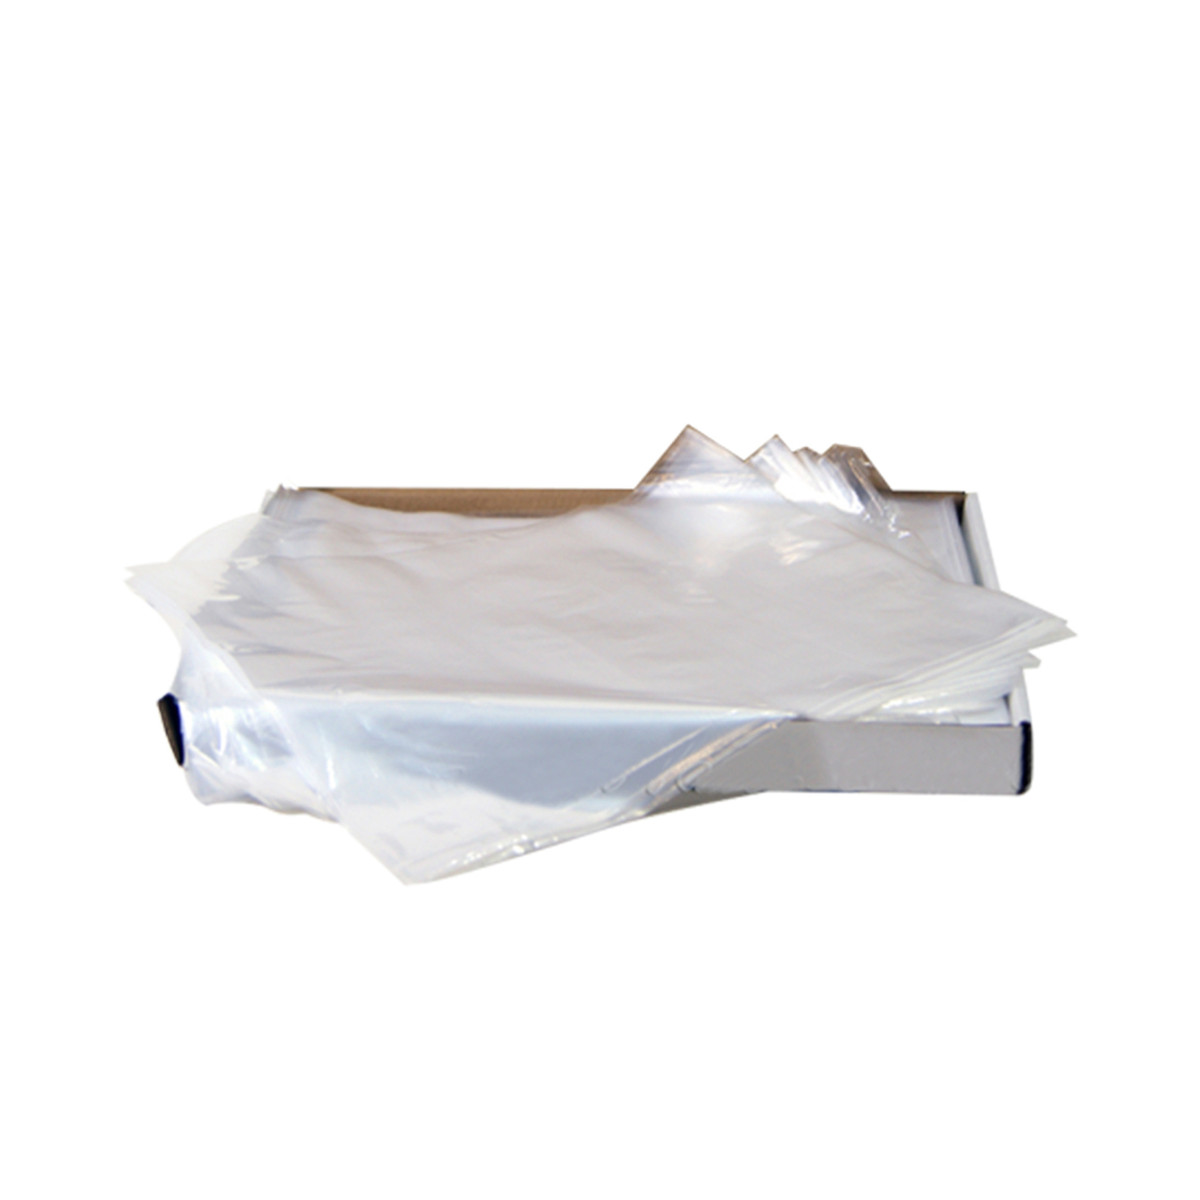 Tray Sleeves - Large 11 5/8" x 16"